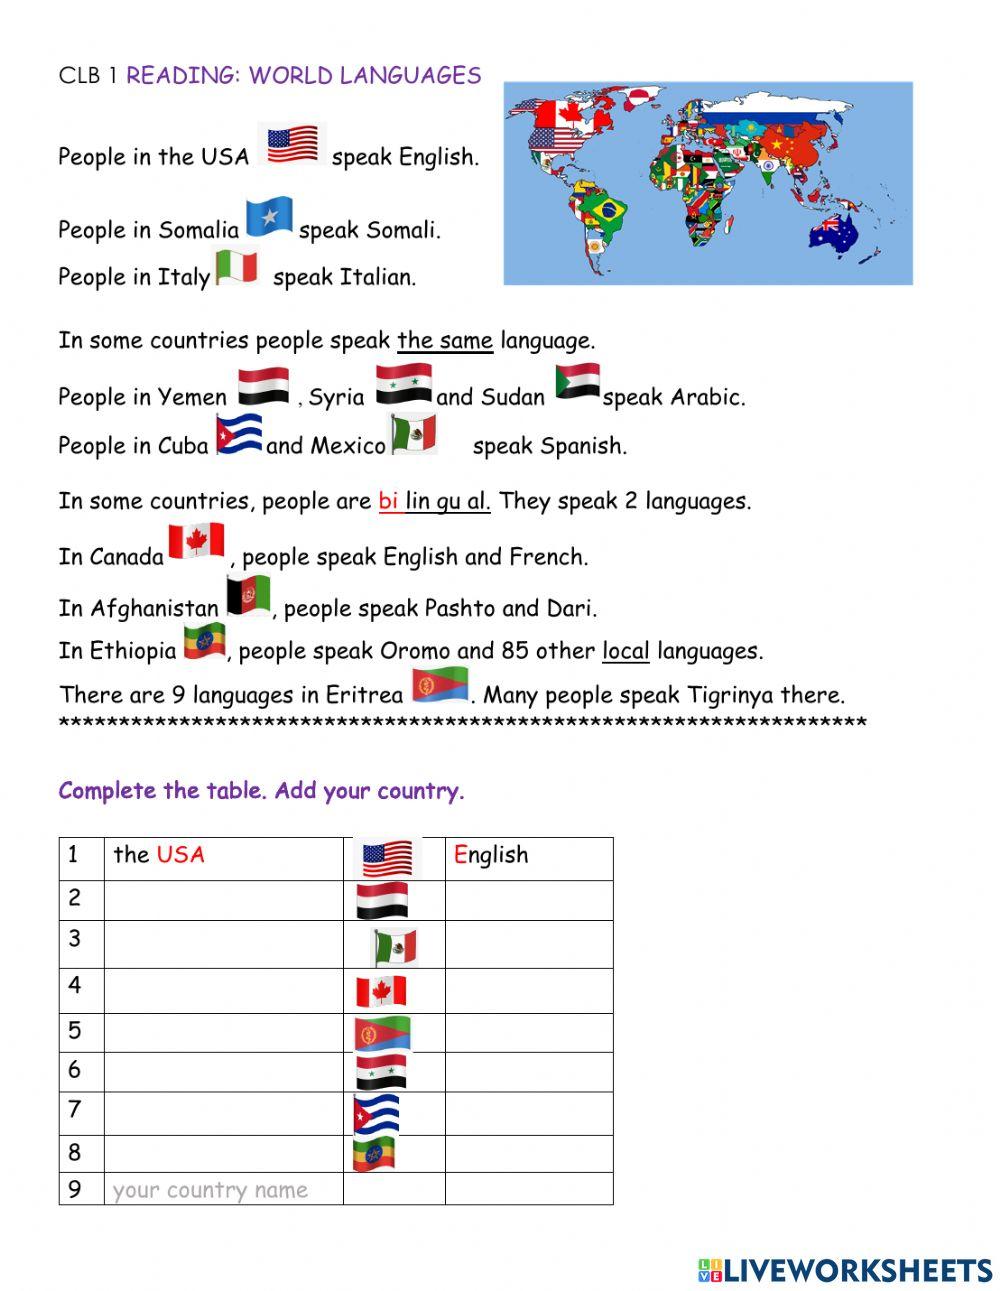 CLB 1 Languages and Countries